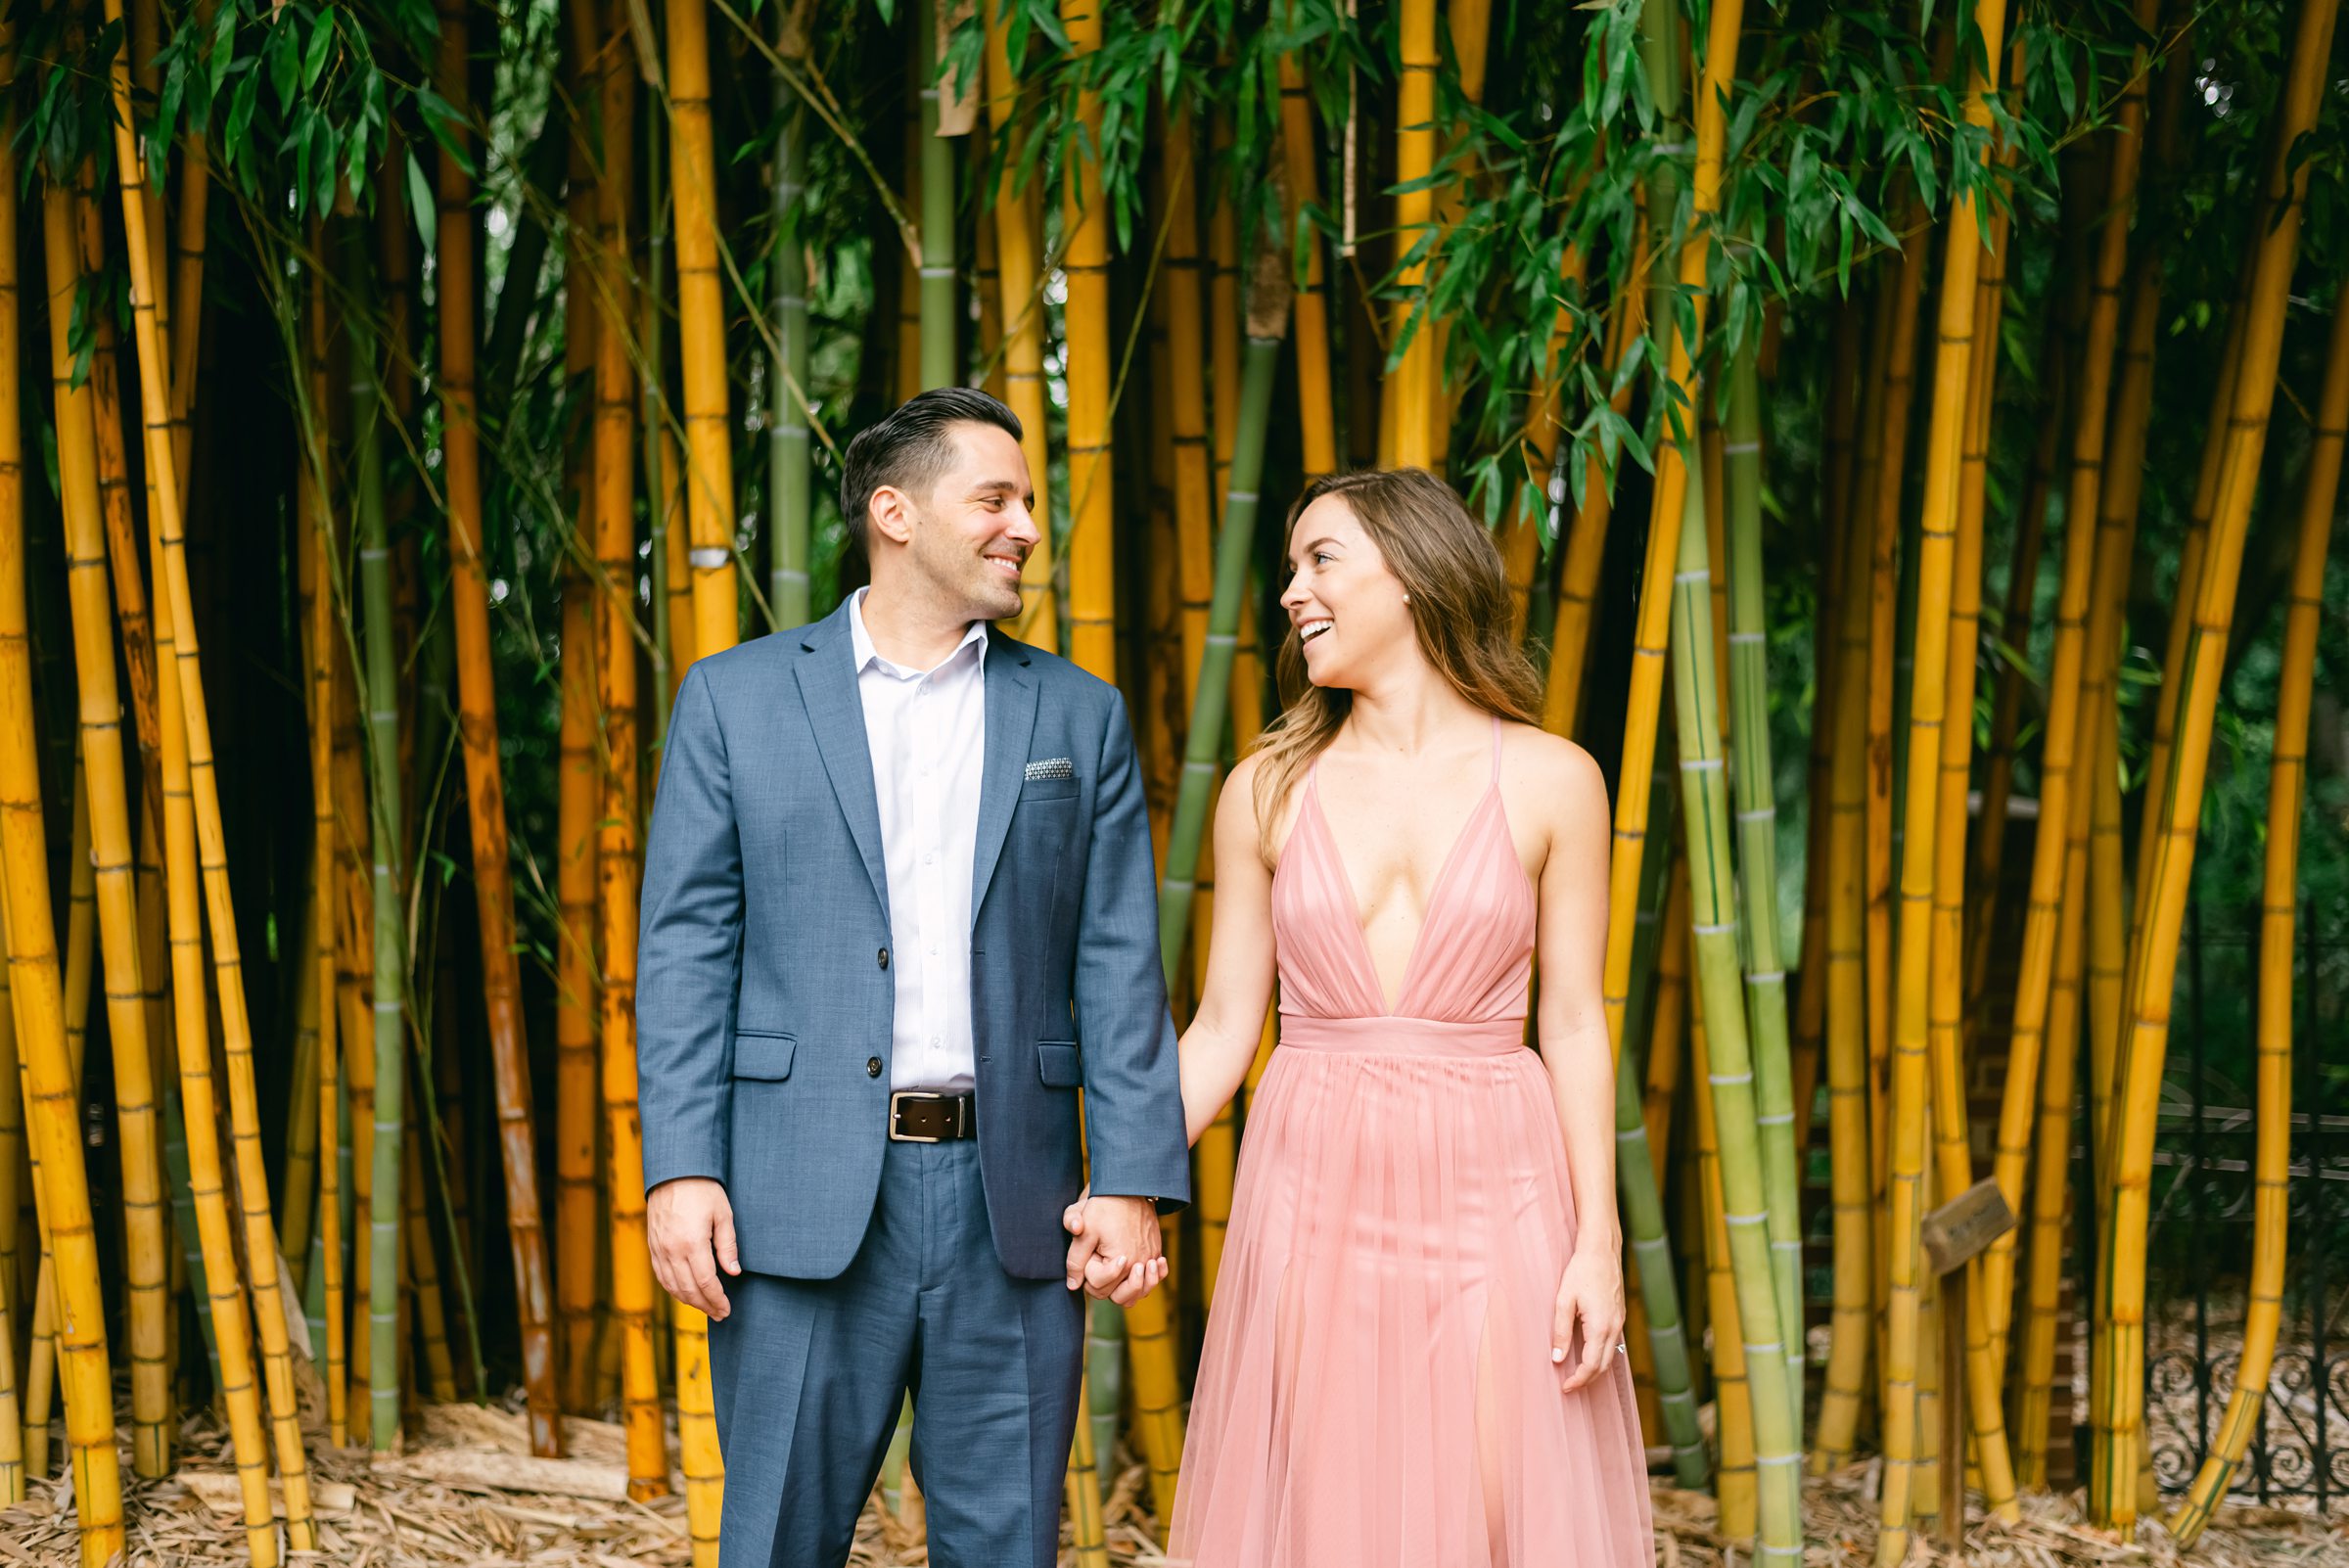 the couple looking at each other lovingly in front of orange bamboo trees.